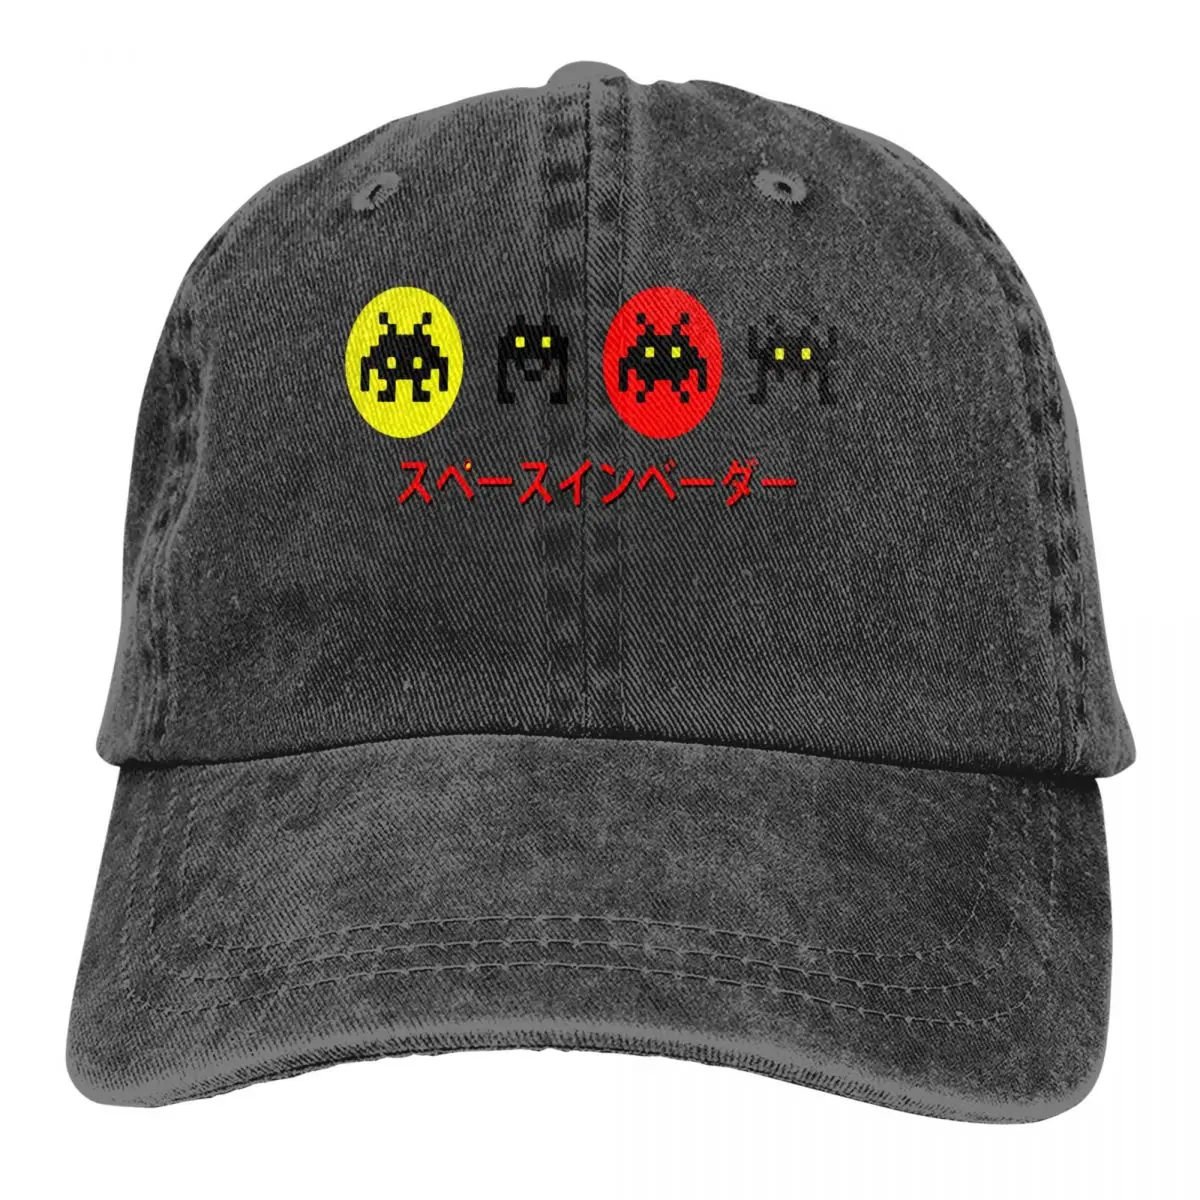 

Washed Men's Baseball Cap Pix Alien Trucker Snapback Caps Dad Hat Space Invaders Airplane Shooting Game Golf Hats